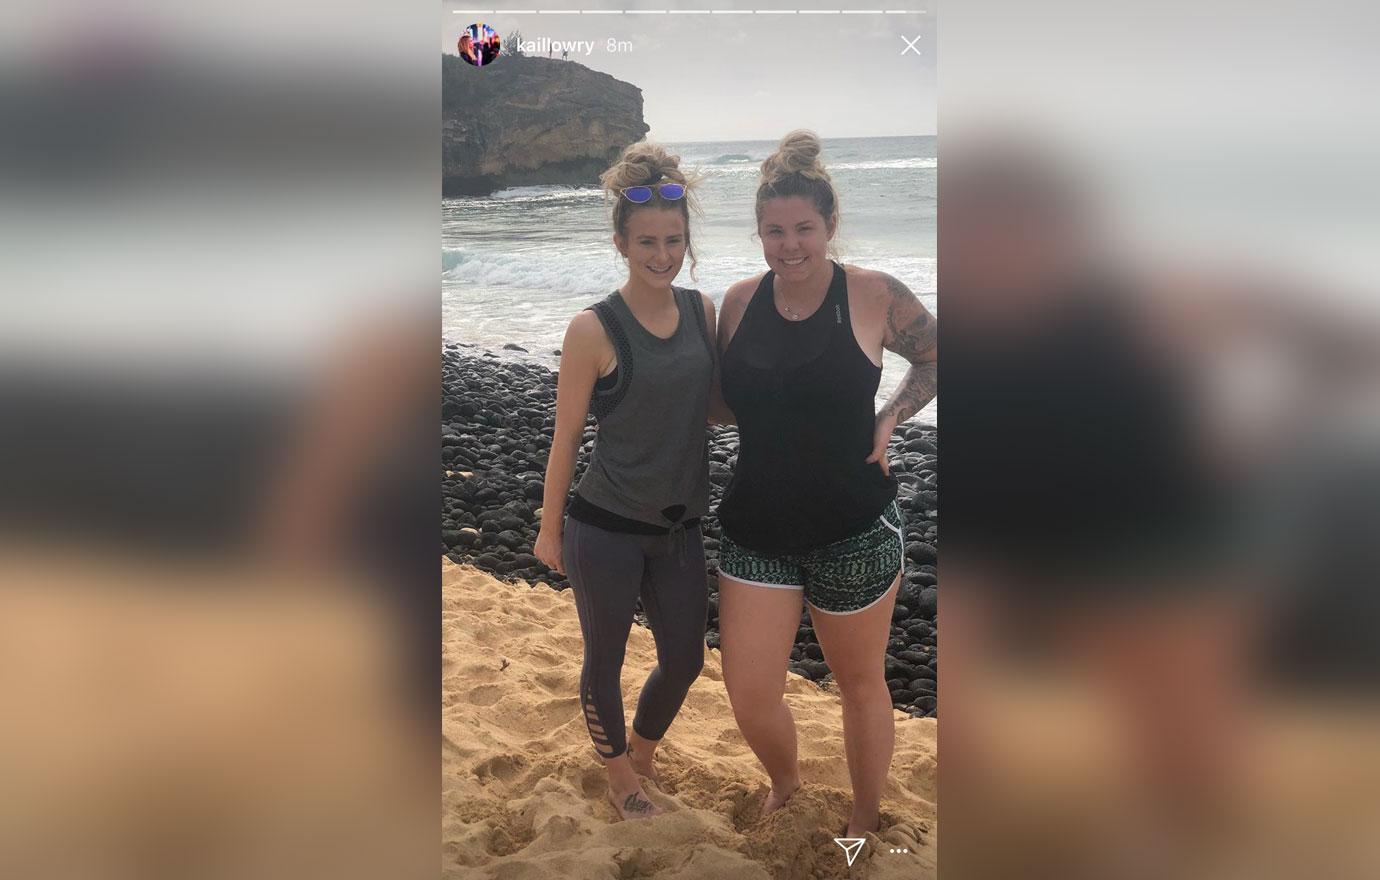 Leah Messer And Kailyn Lowry Show Off Their Toned Bodies In Tiny Bikinis